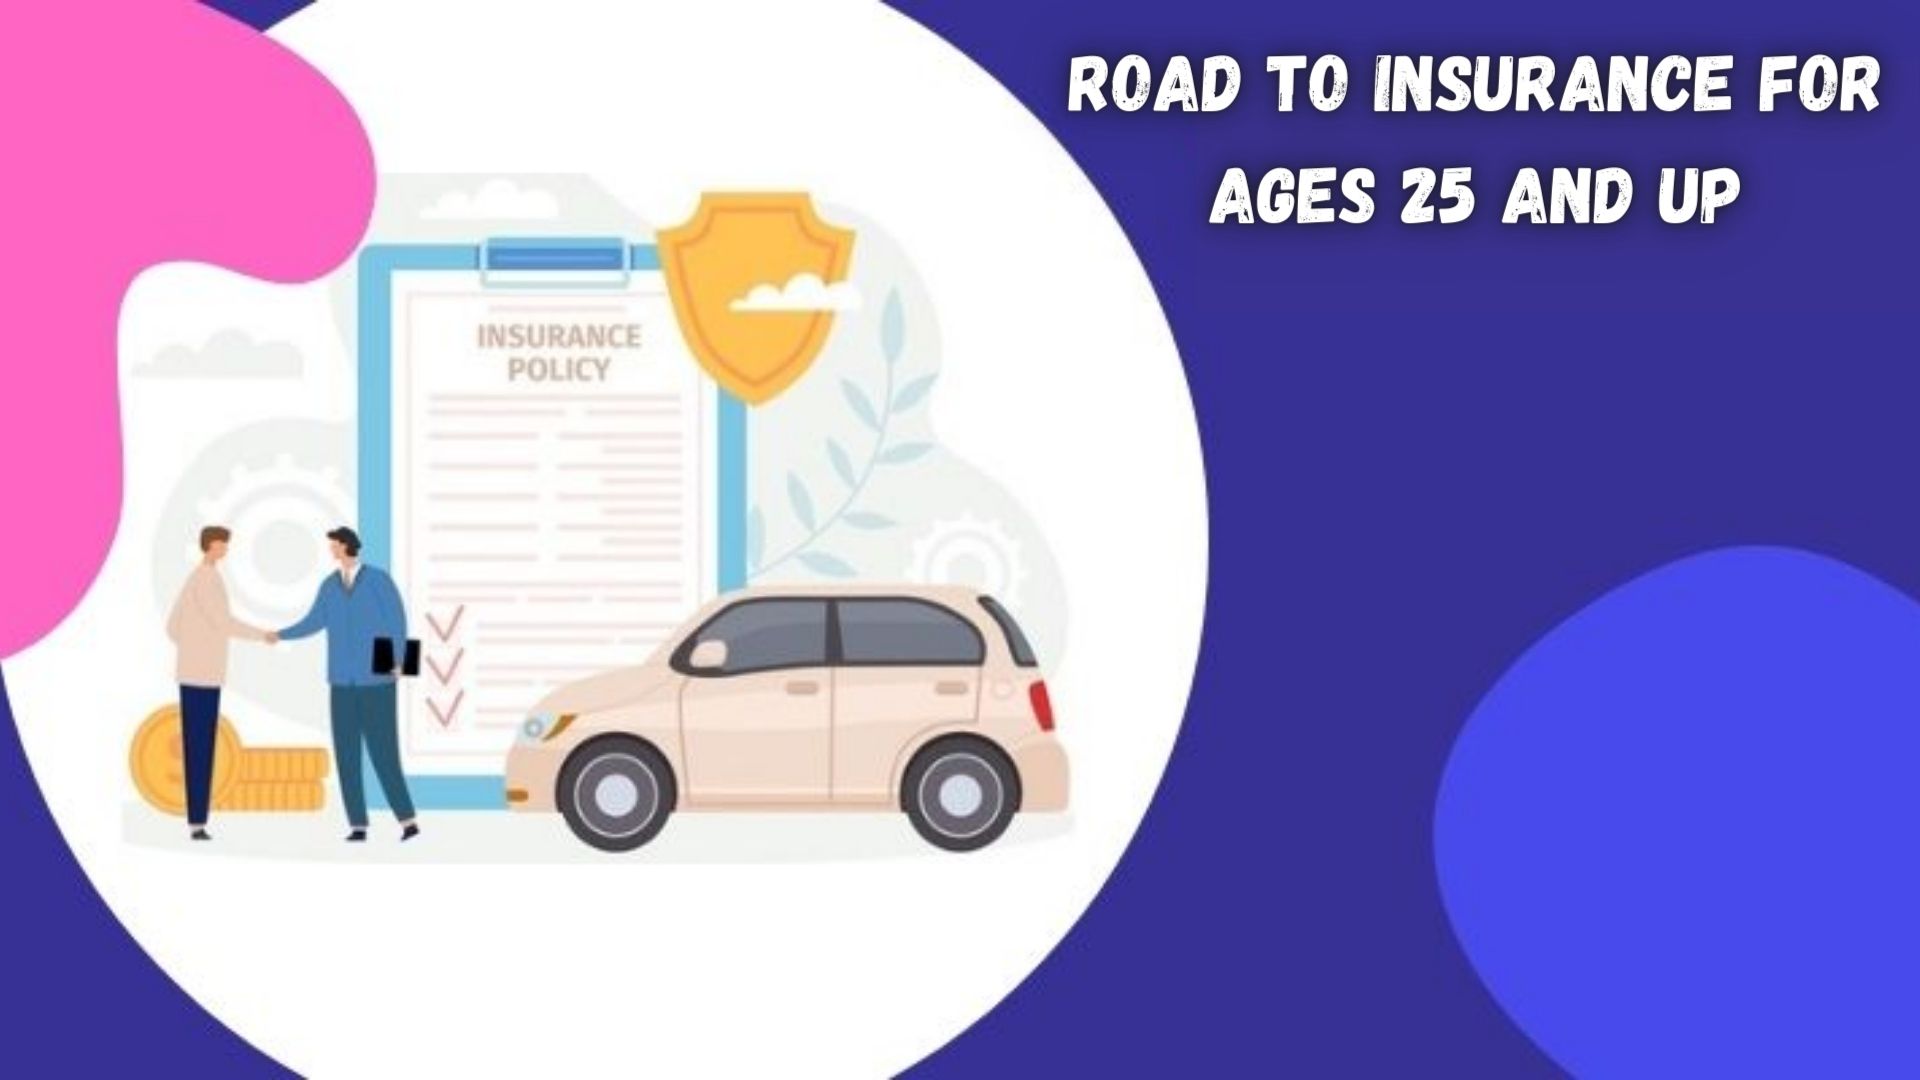 The Road to Insurance for Ages 25 and Up.